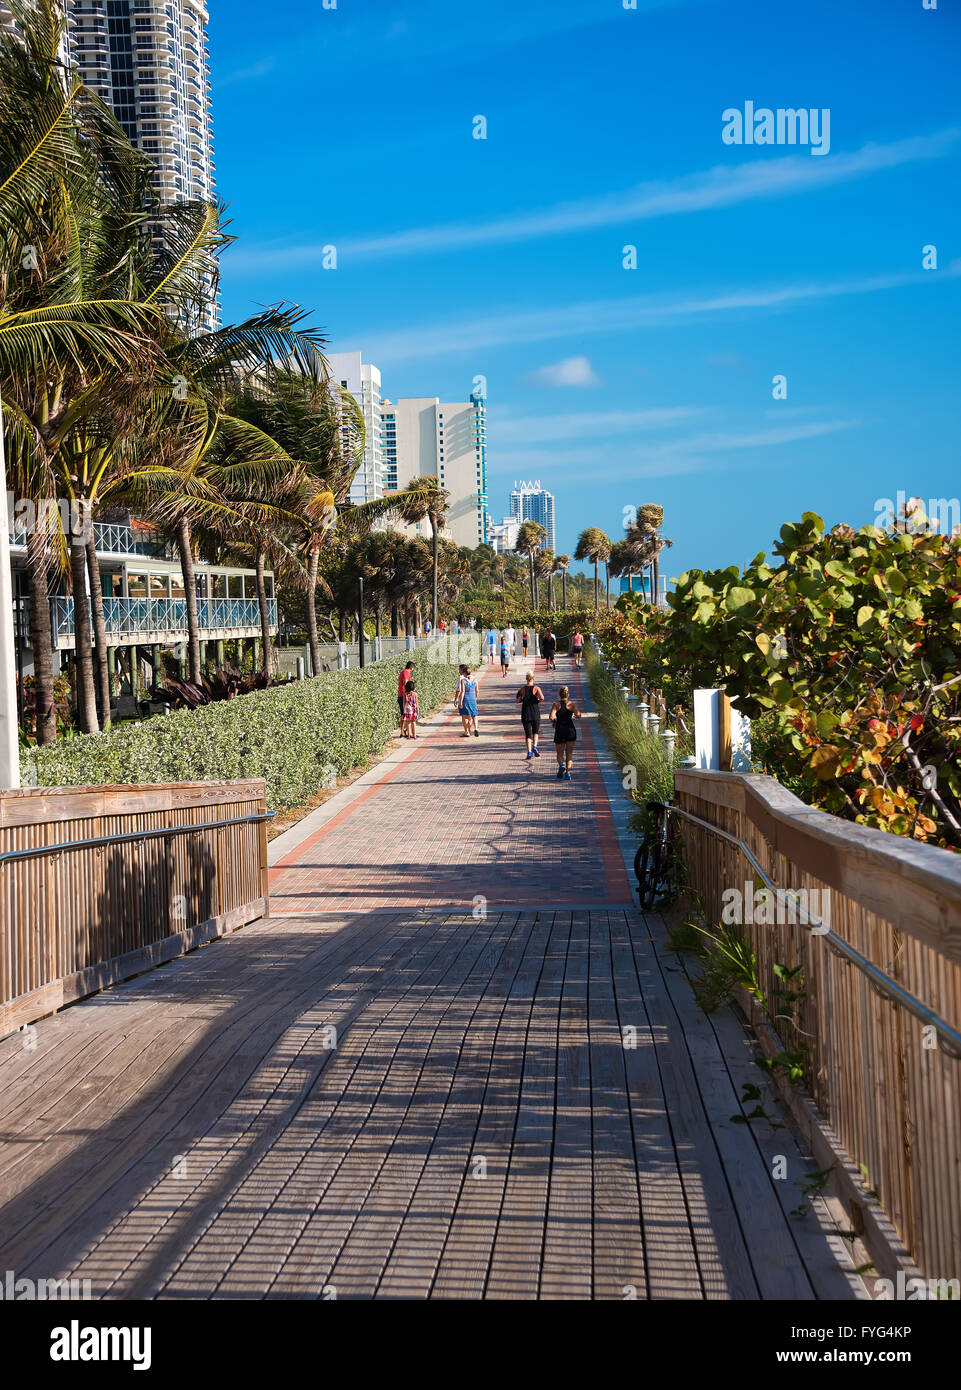 Runners and walkers on the Miami Beach Boardwalk in South Beach Stock Photo: 103002474 - Alamy